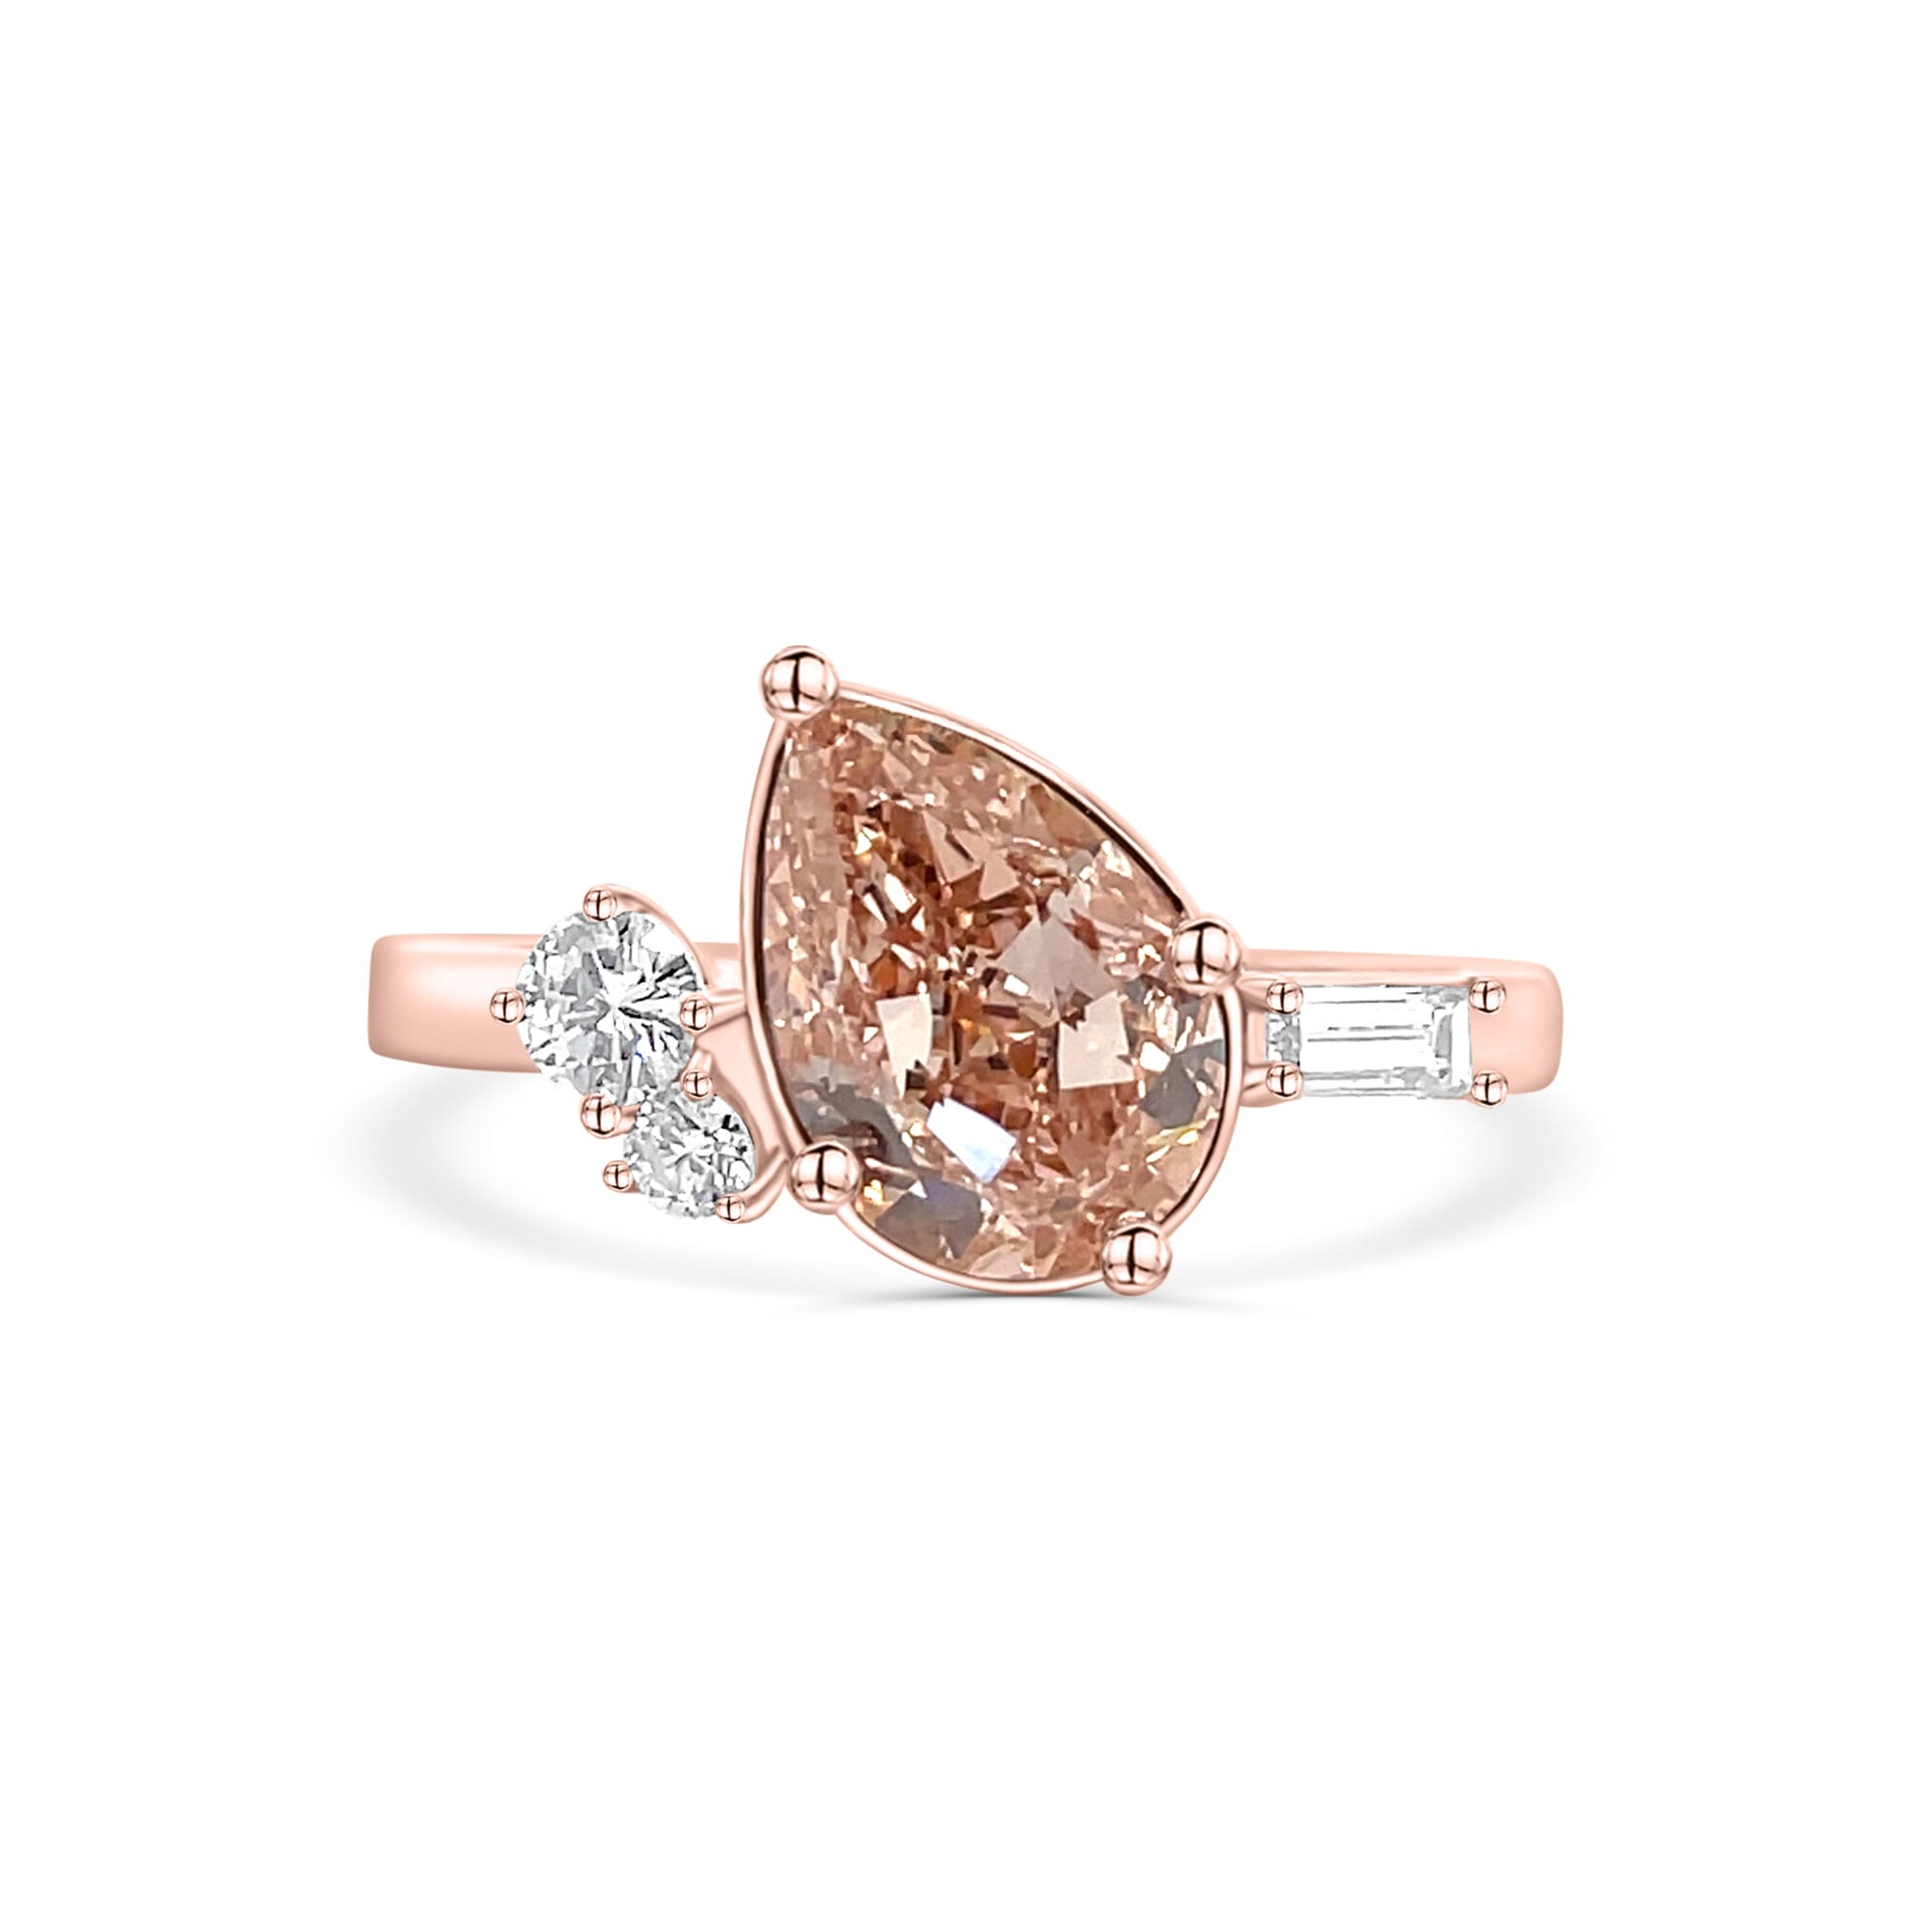 Unique custom Rose Gold Ring with a Brown Pink pear diamond, two round diamonds and a baguette diamond.